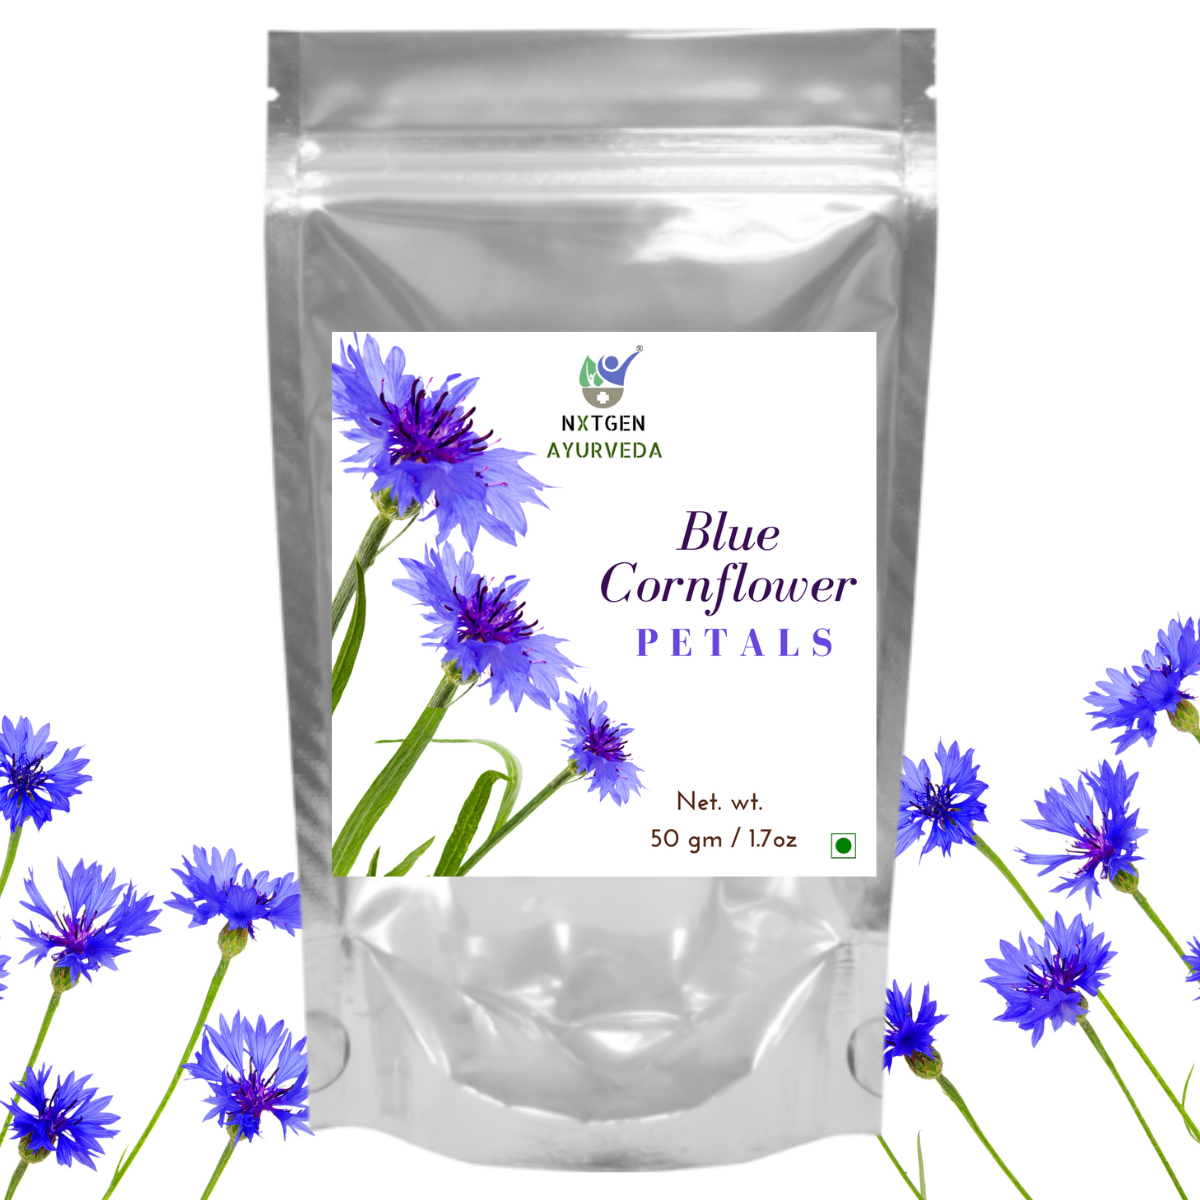 One common use for blue cornflower petals is in herbal teas or tisanes, where they can add a pleasant floral flavor and a striking blue color. 